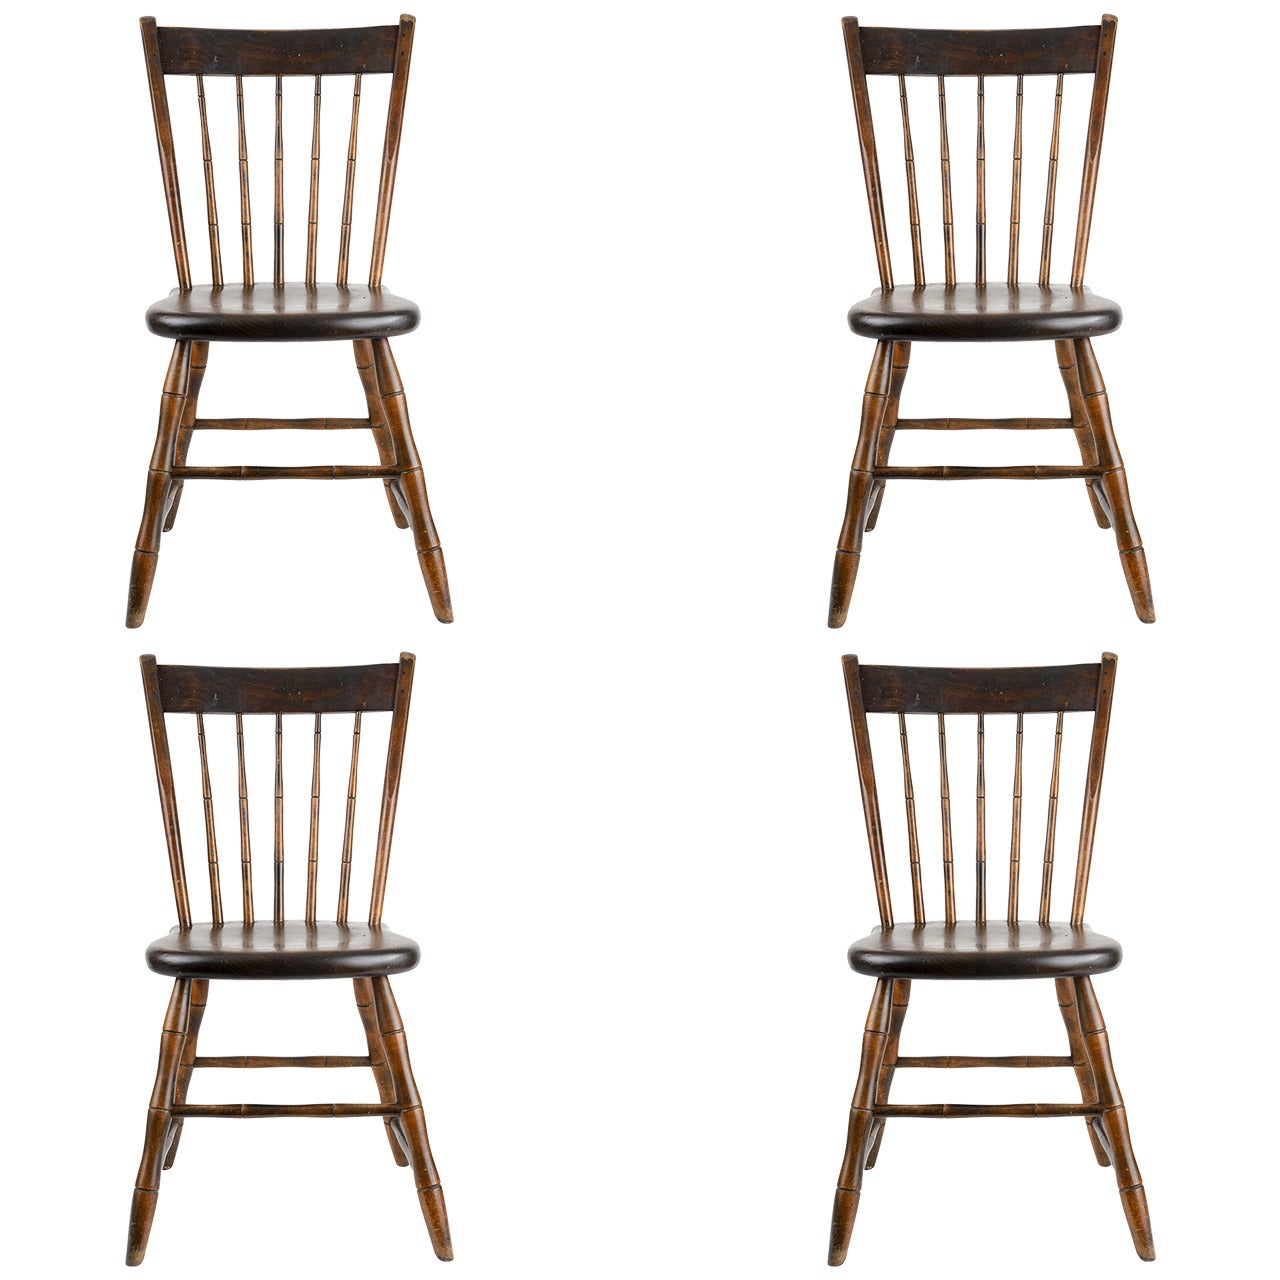 19th Century Country Windsor Chairs, Set of Four